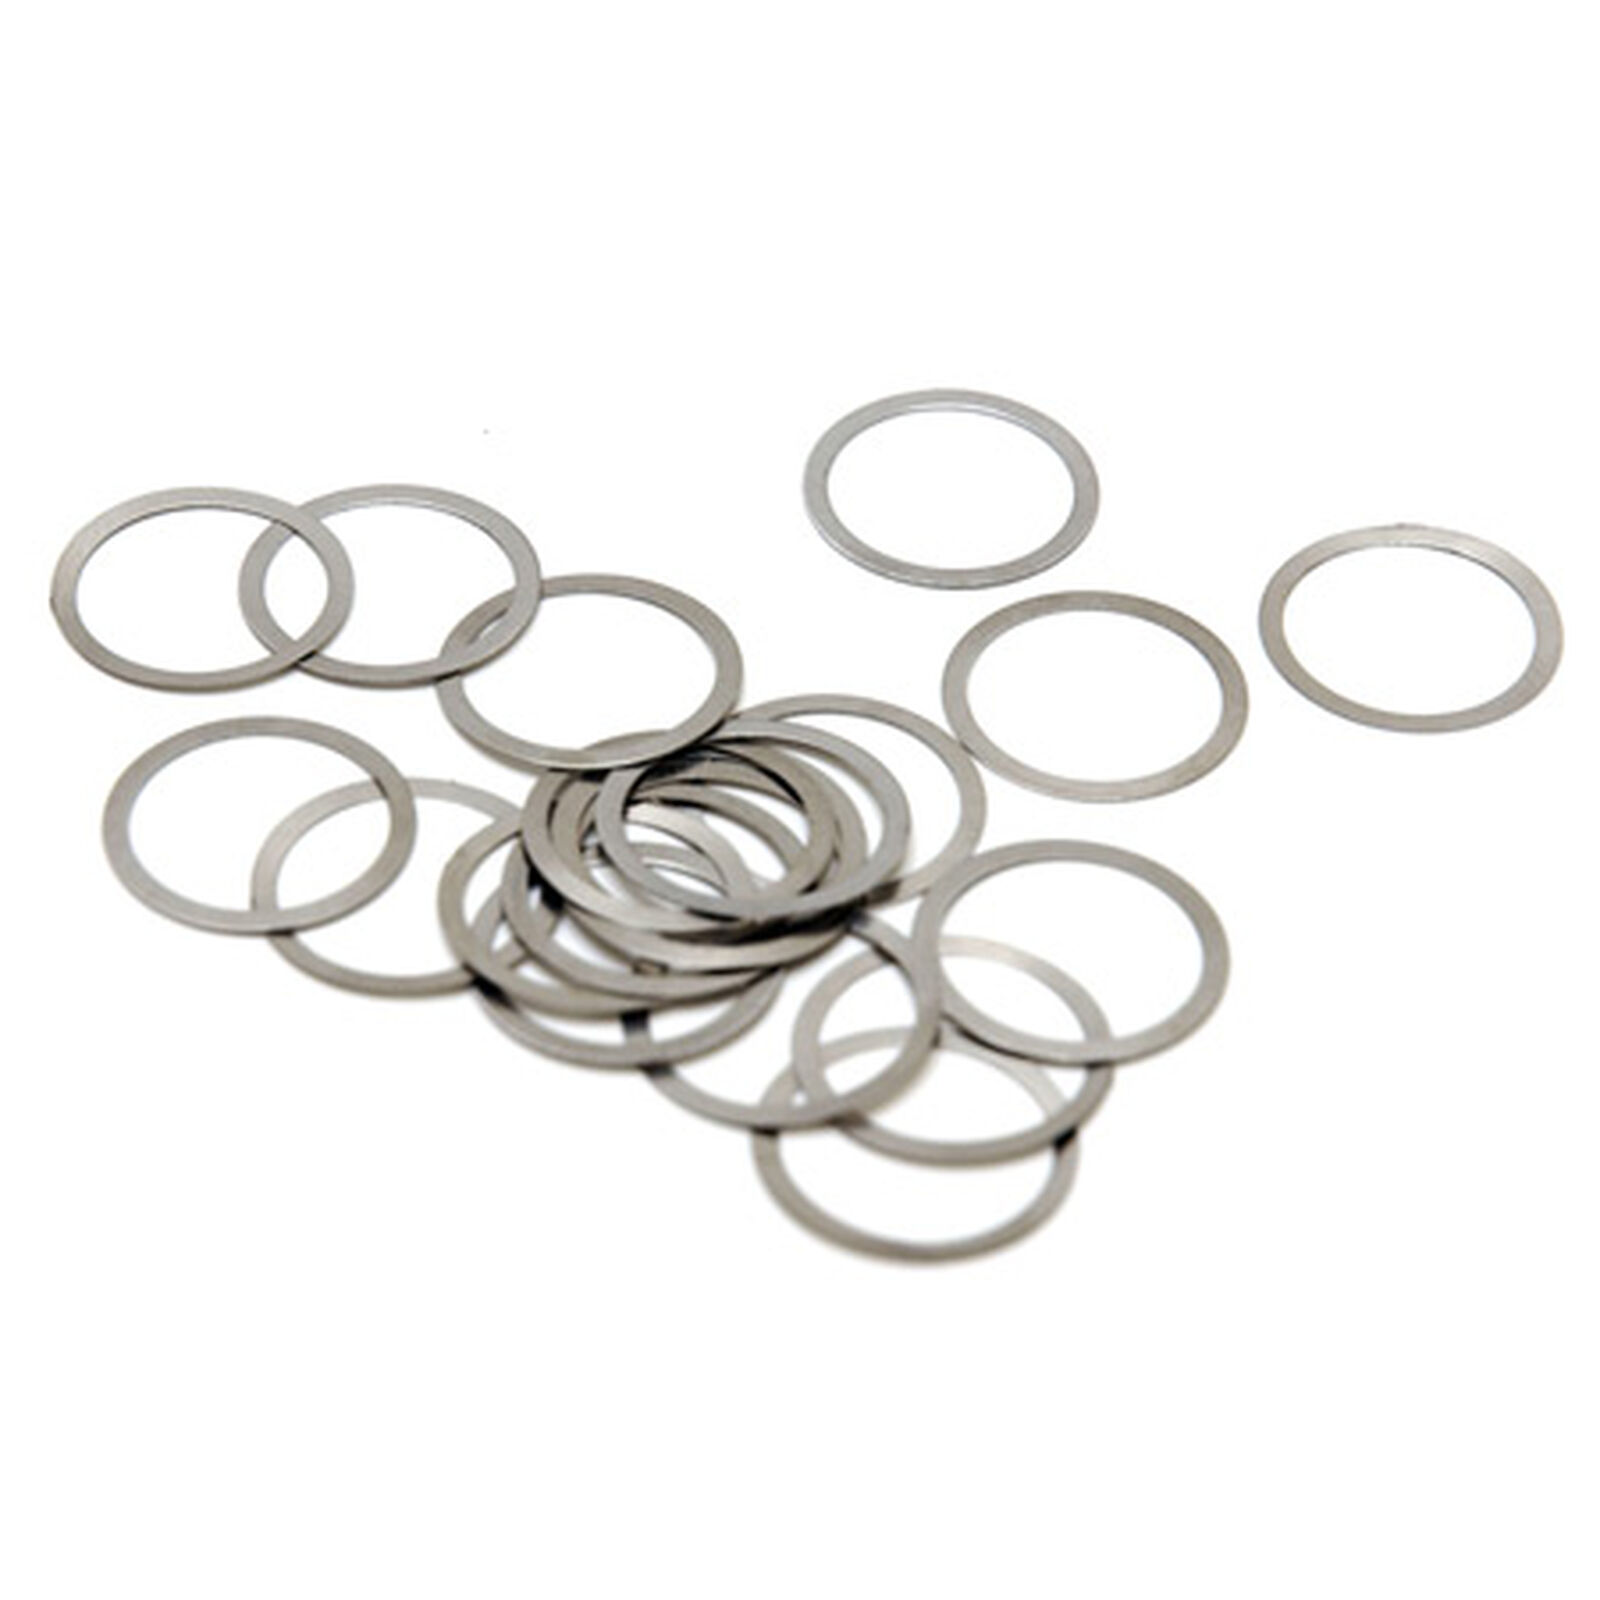 PTFE-Fett universal, 25g, Robbe # 5532, Gear accessories, Gearboxes for  electric motors, Electric motors, combos and gearboxes